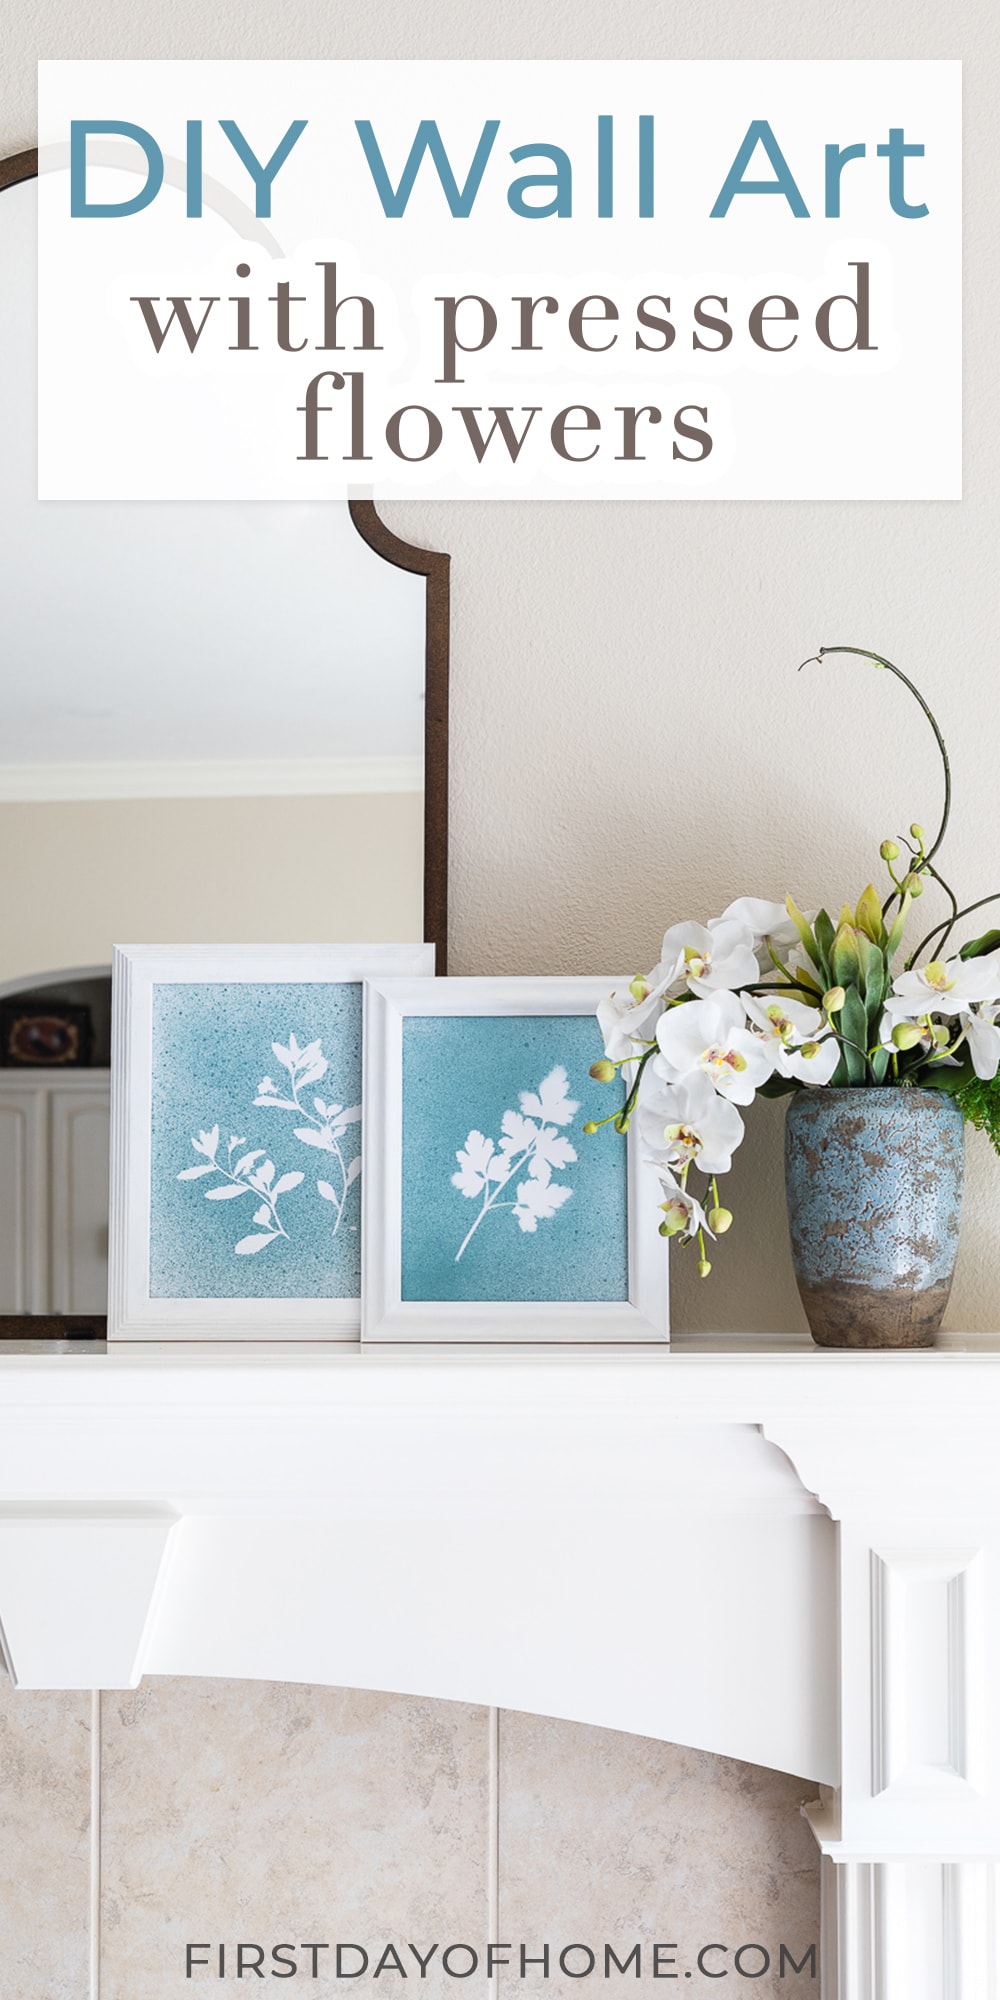 DIY wall art made with pressed flowers sitting on a fireplace mantel with a faux floral arrangement. Text overlay reads "DIY Wall Art with Pressed Flowers"